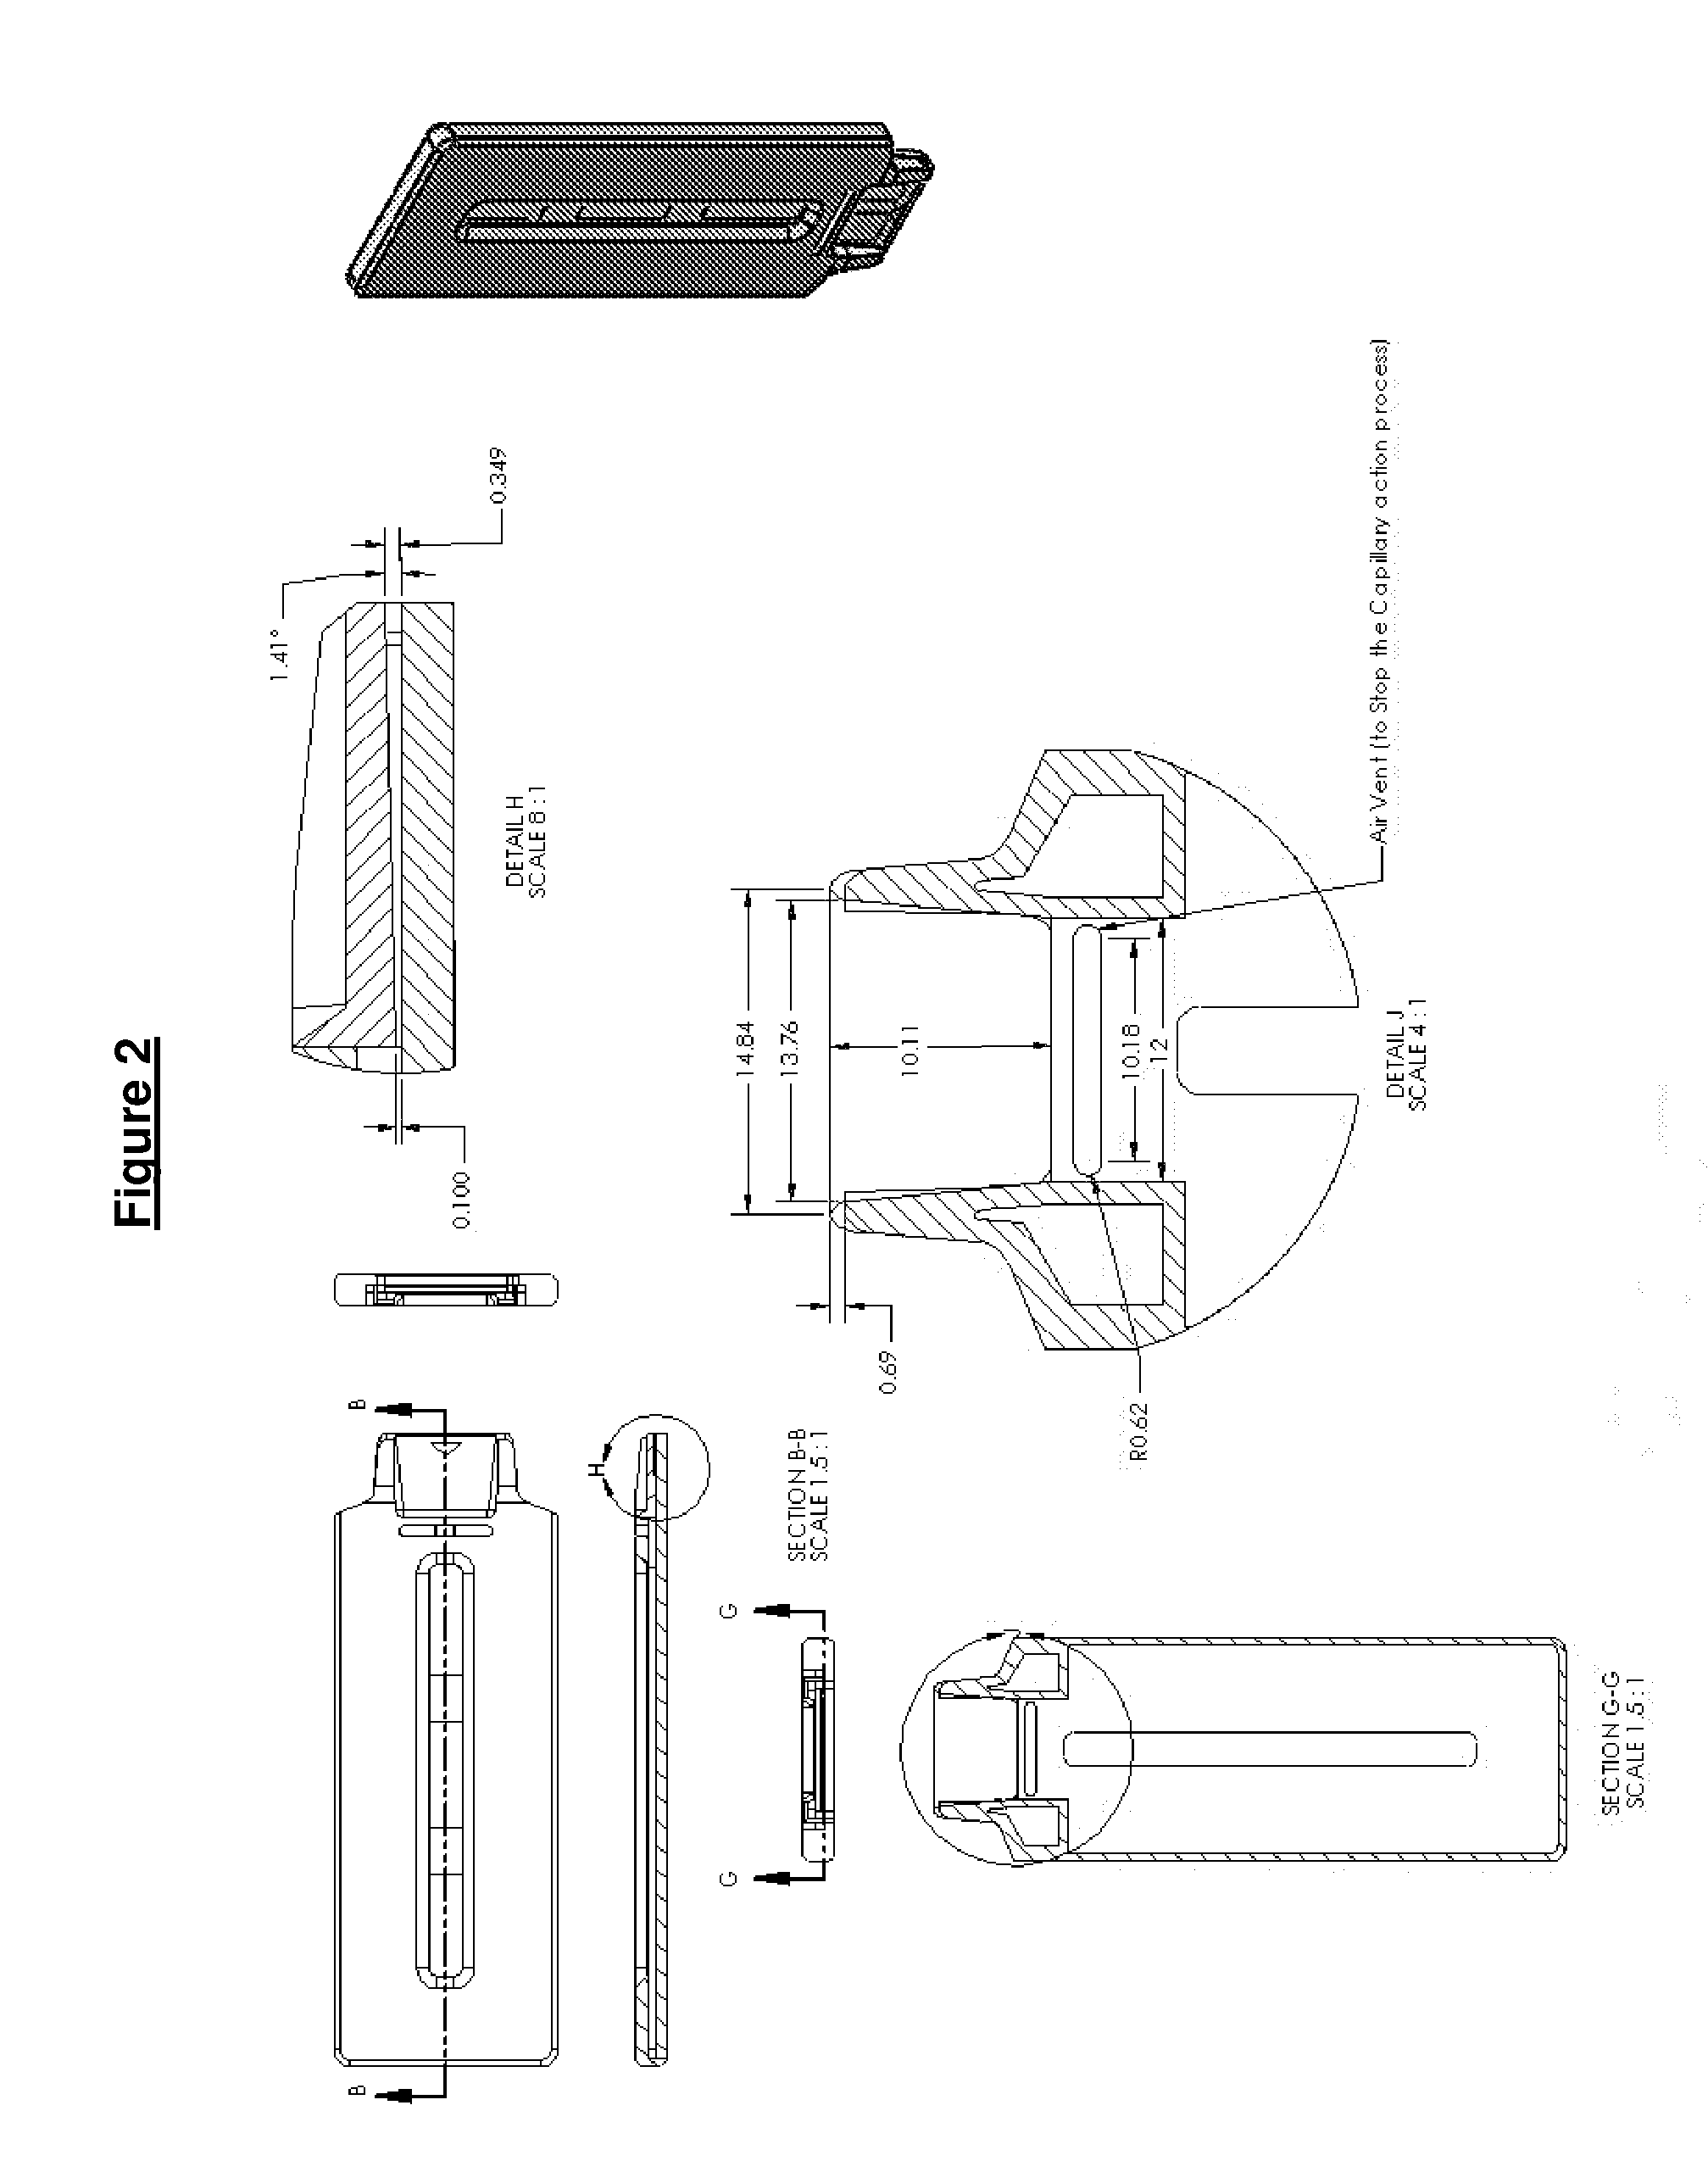 Device and Methods